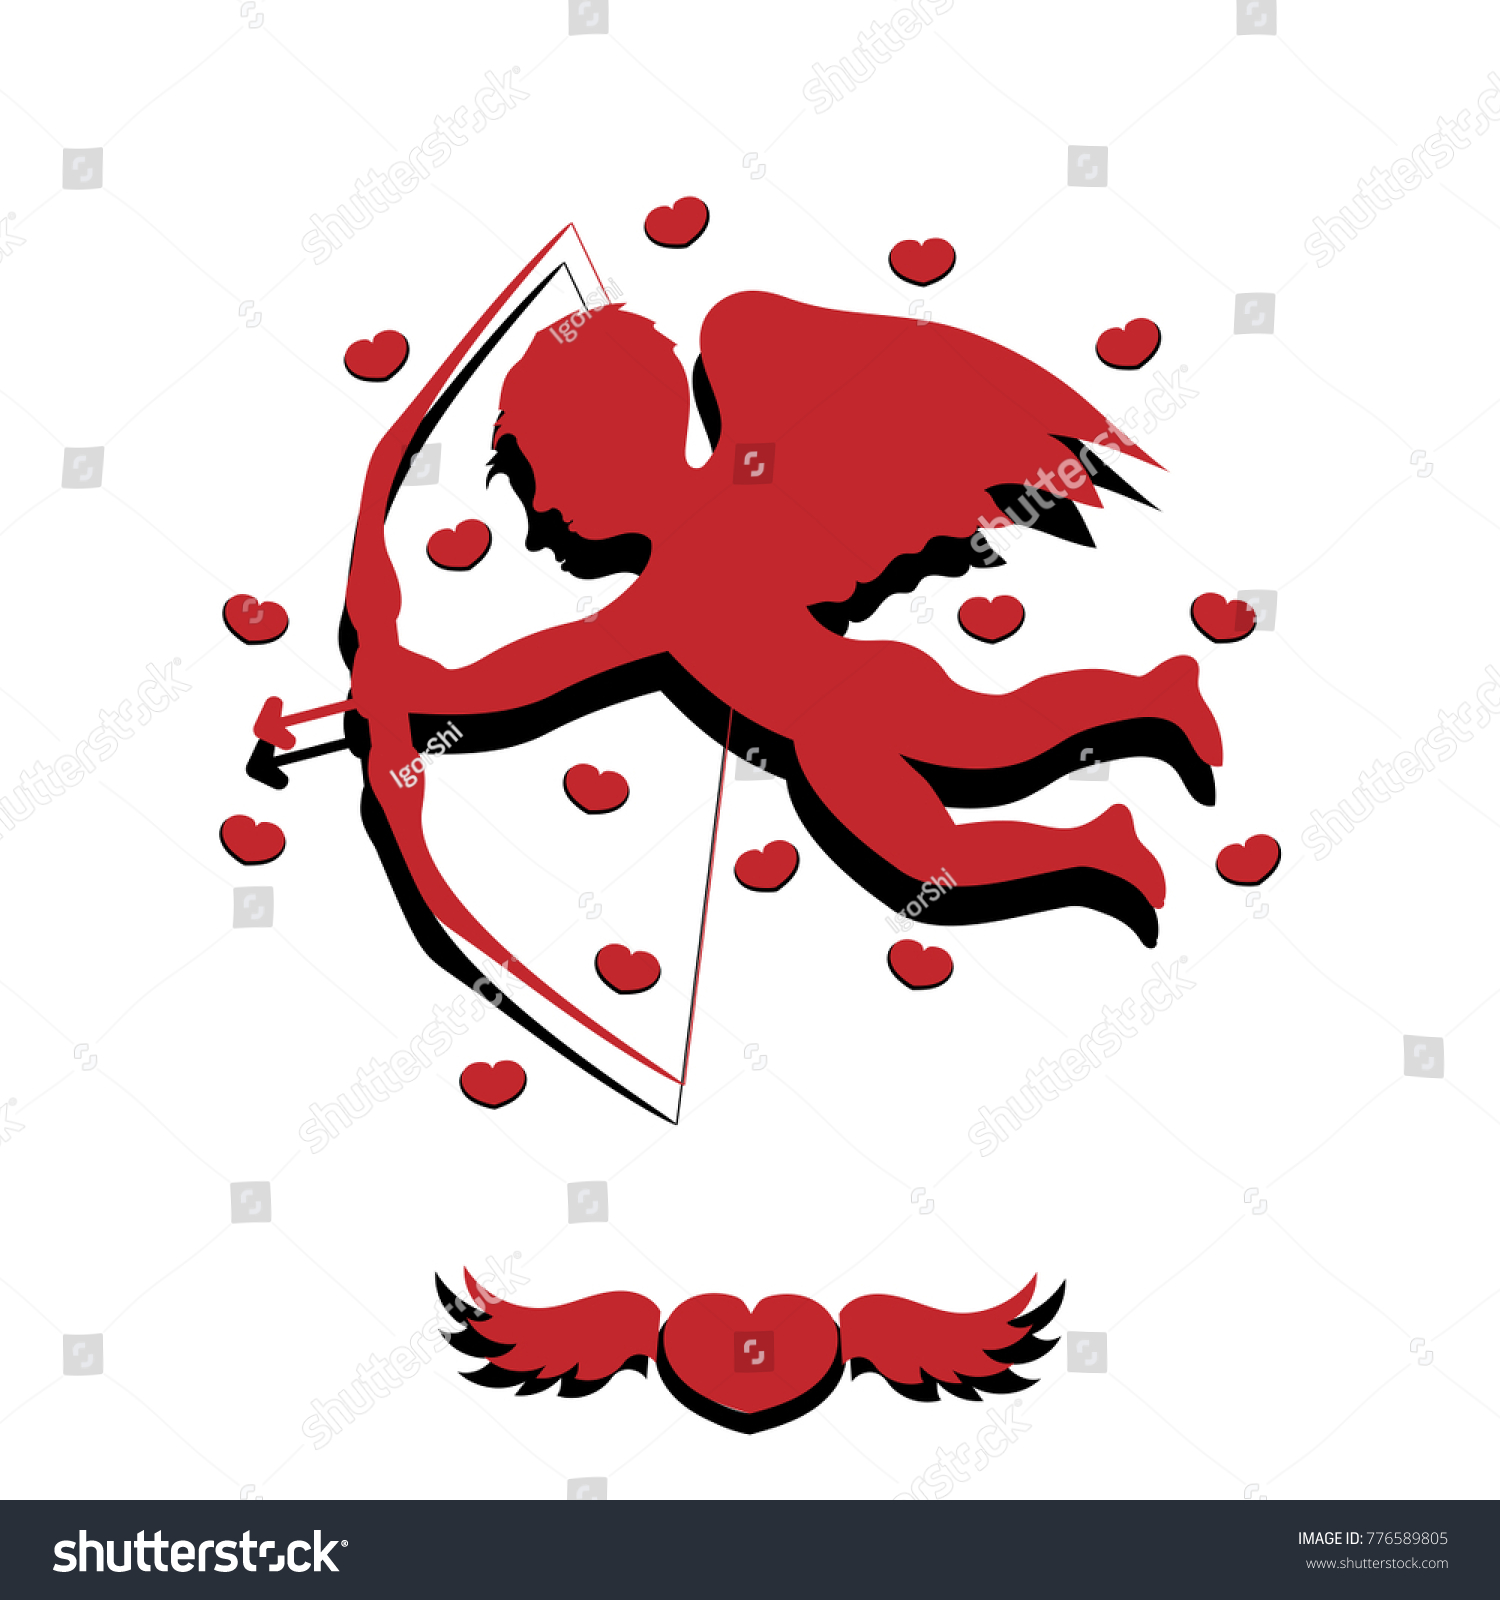 Cupid Silhouette Vector Illustration Stock Vector Royalty Free 776589805 8262